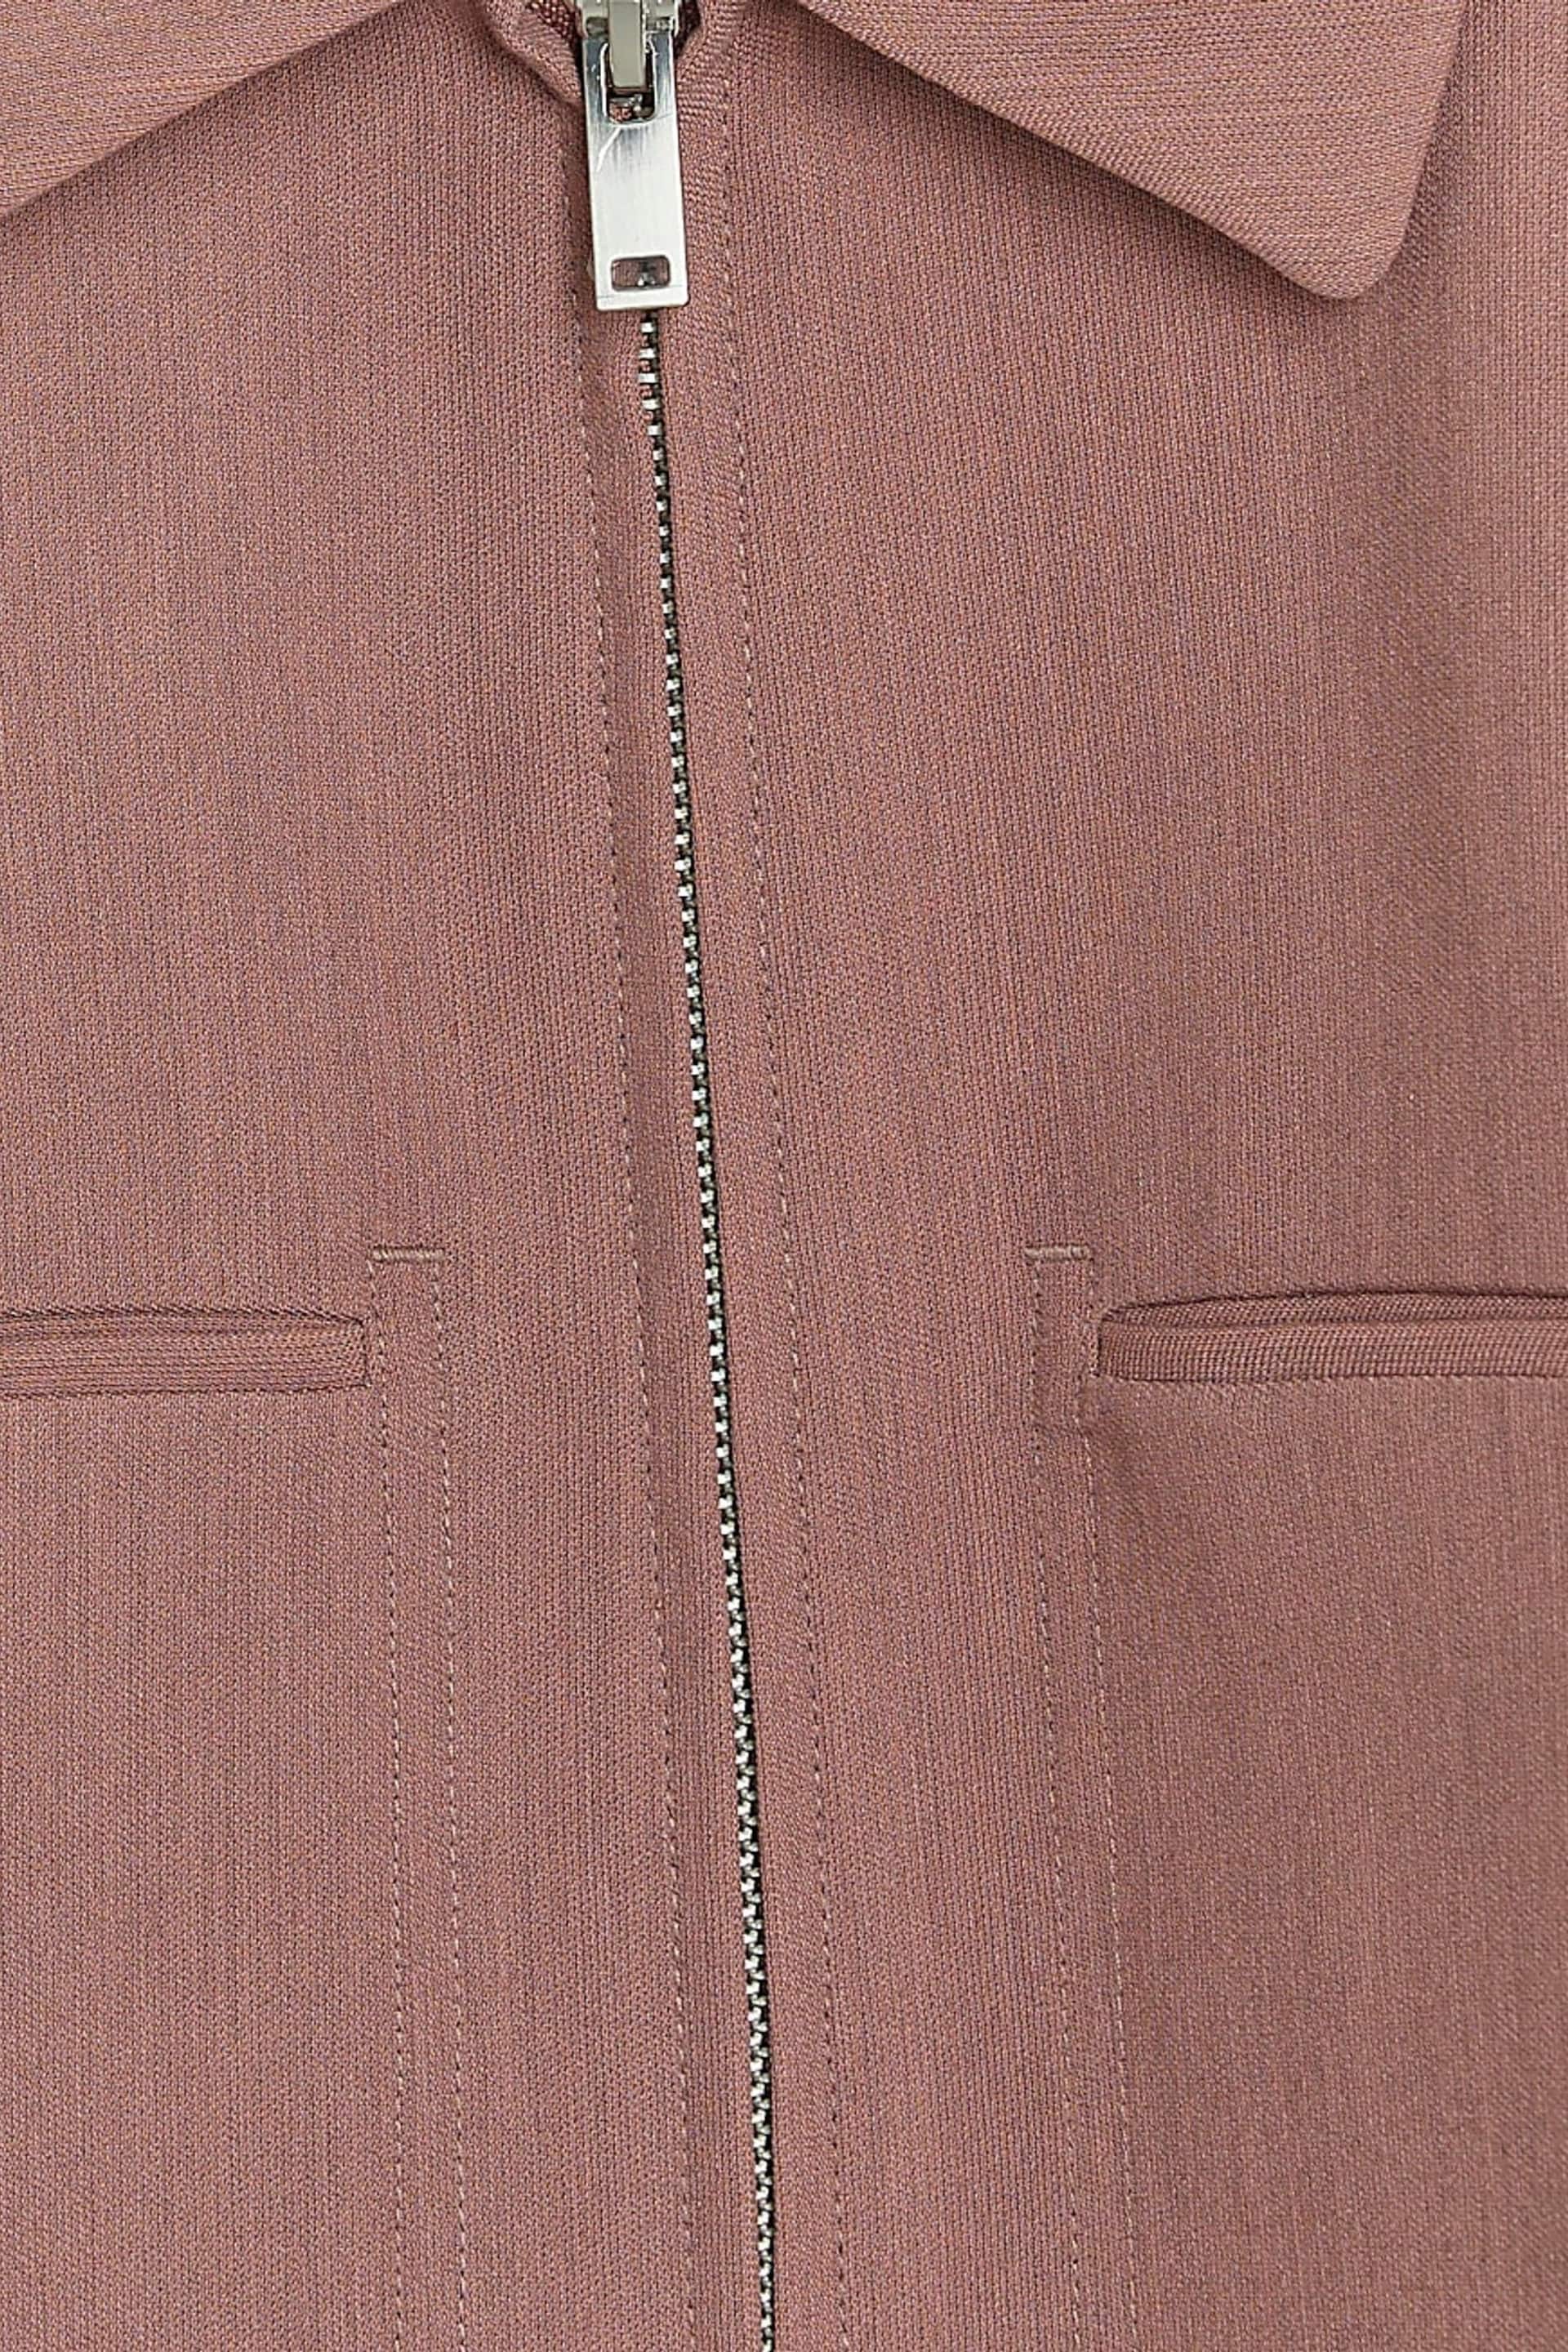 River Island Pink Long Sleeve Essential Crew Jacket - Image 6 of 6